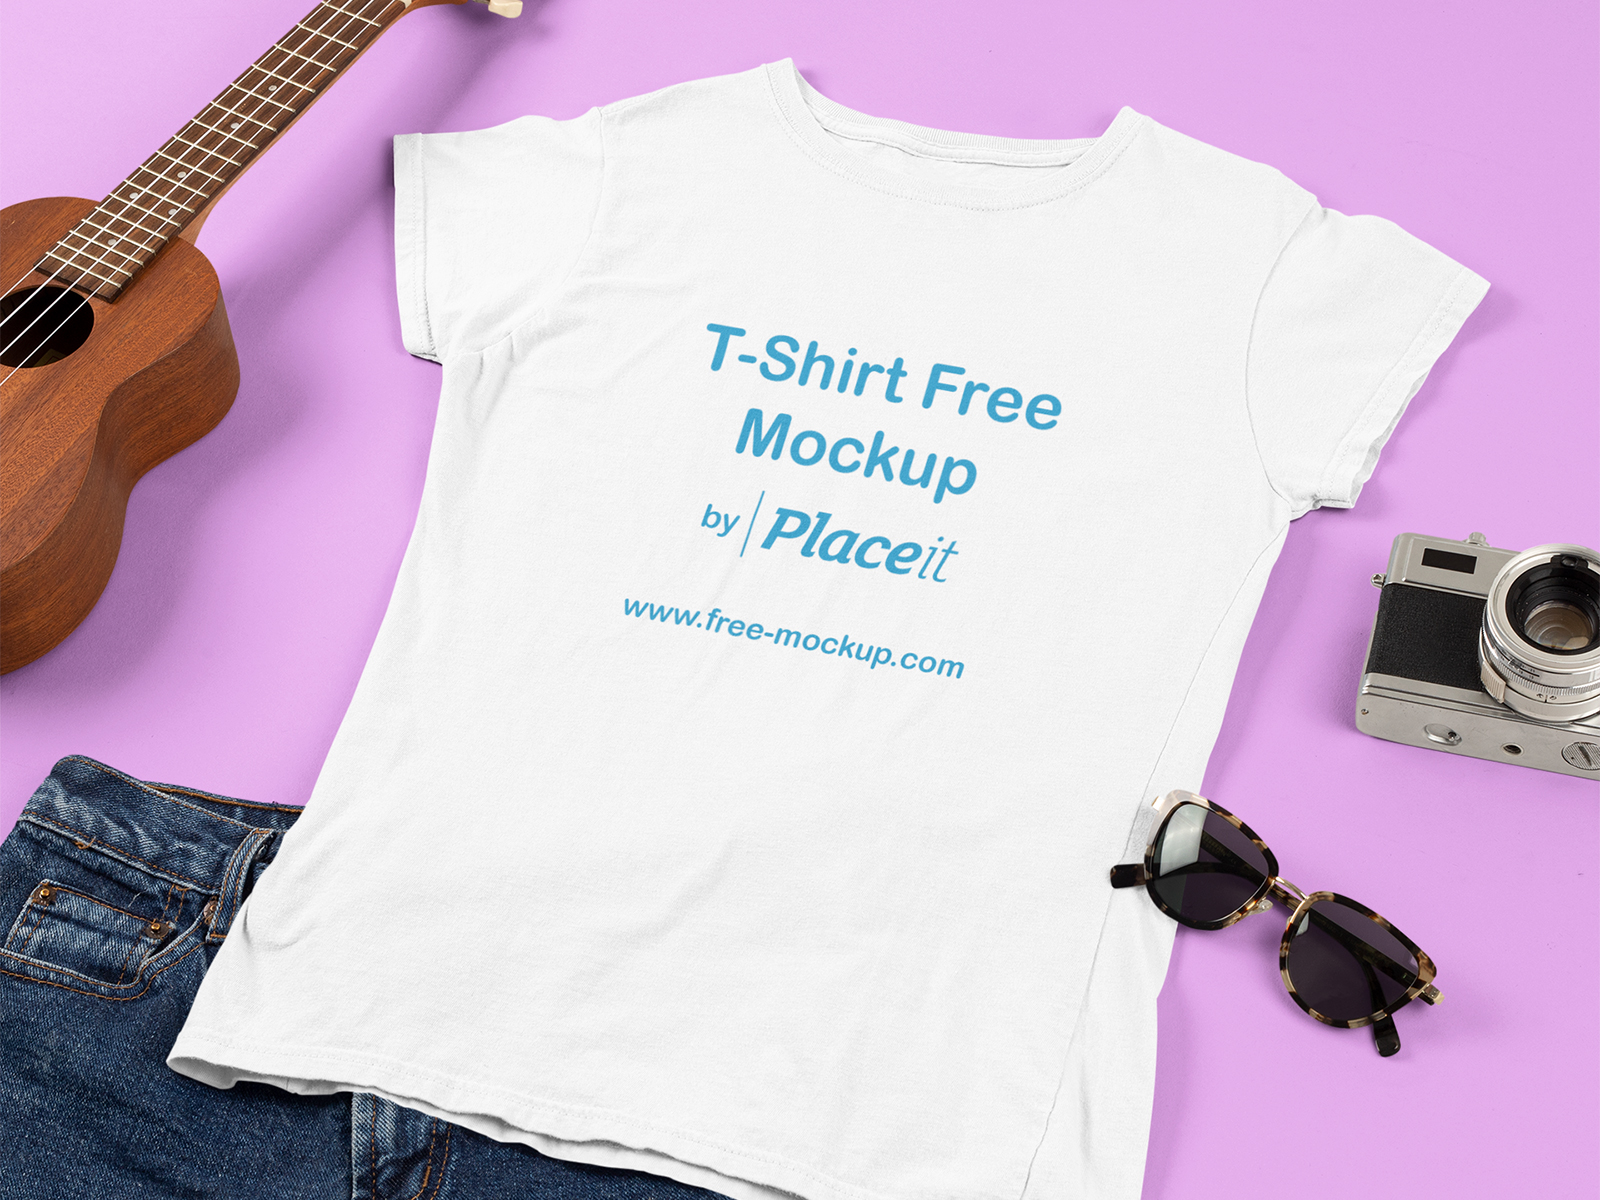 Download T Shirt Placeit Mockup Featuring A Ukulele And A Women S Outfit Free Mockup